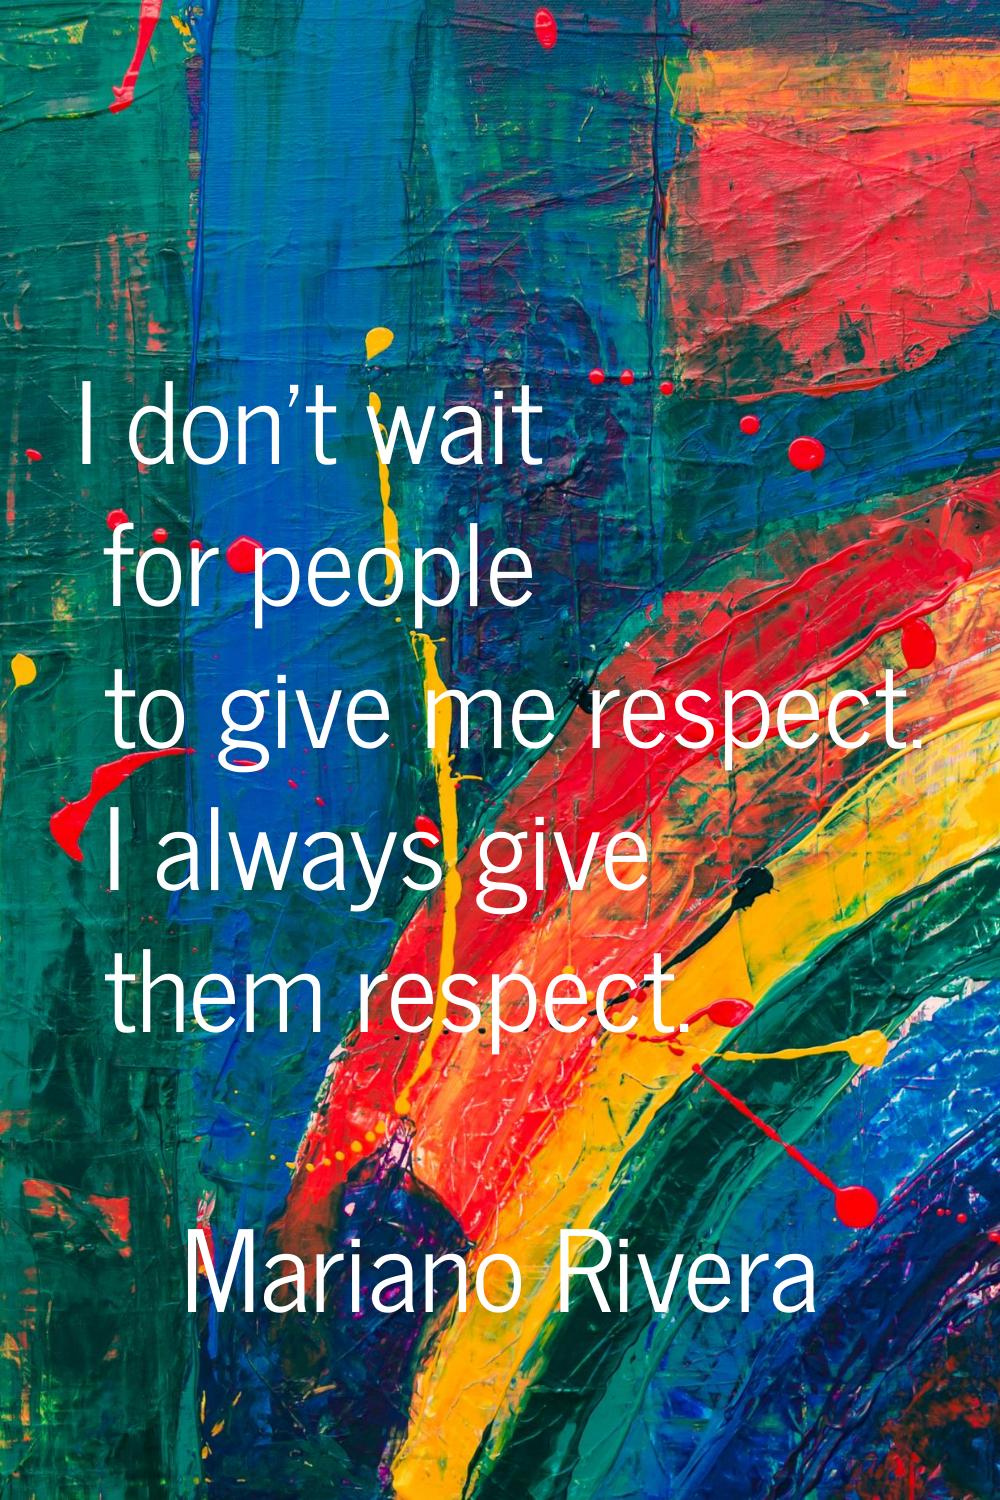 I don't wait for people to give me respect. I always give them respect.